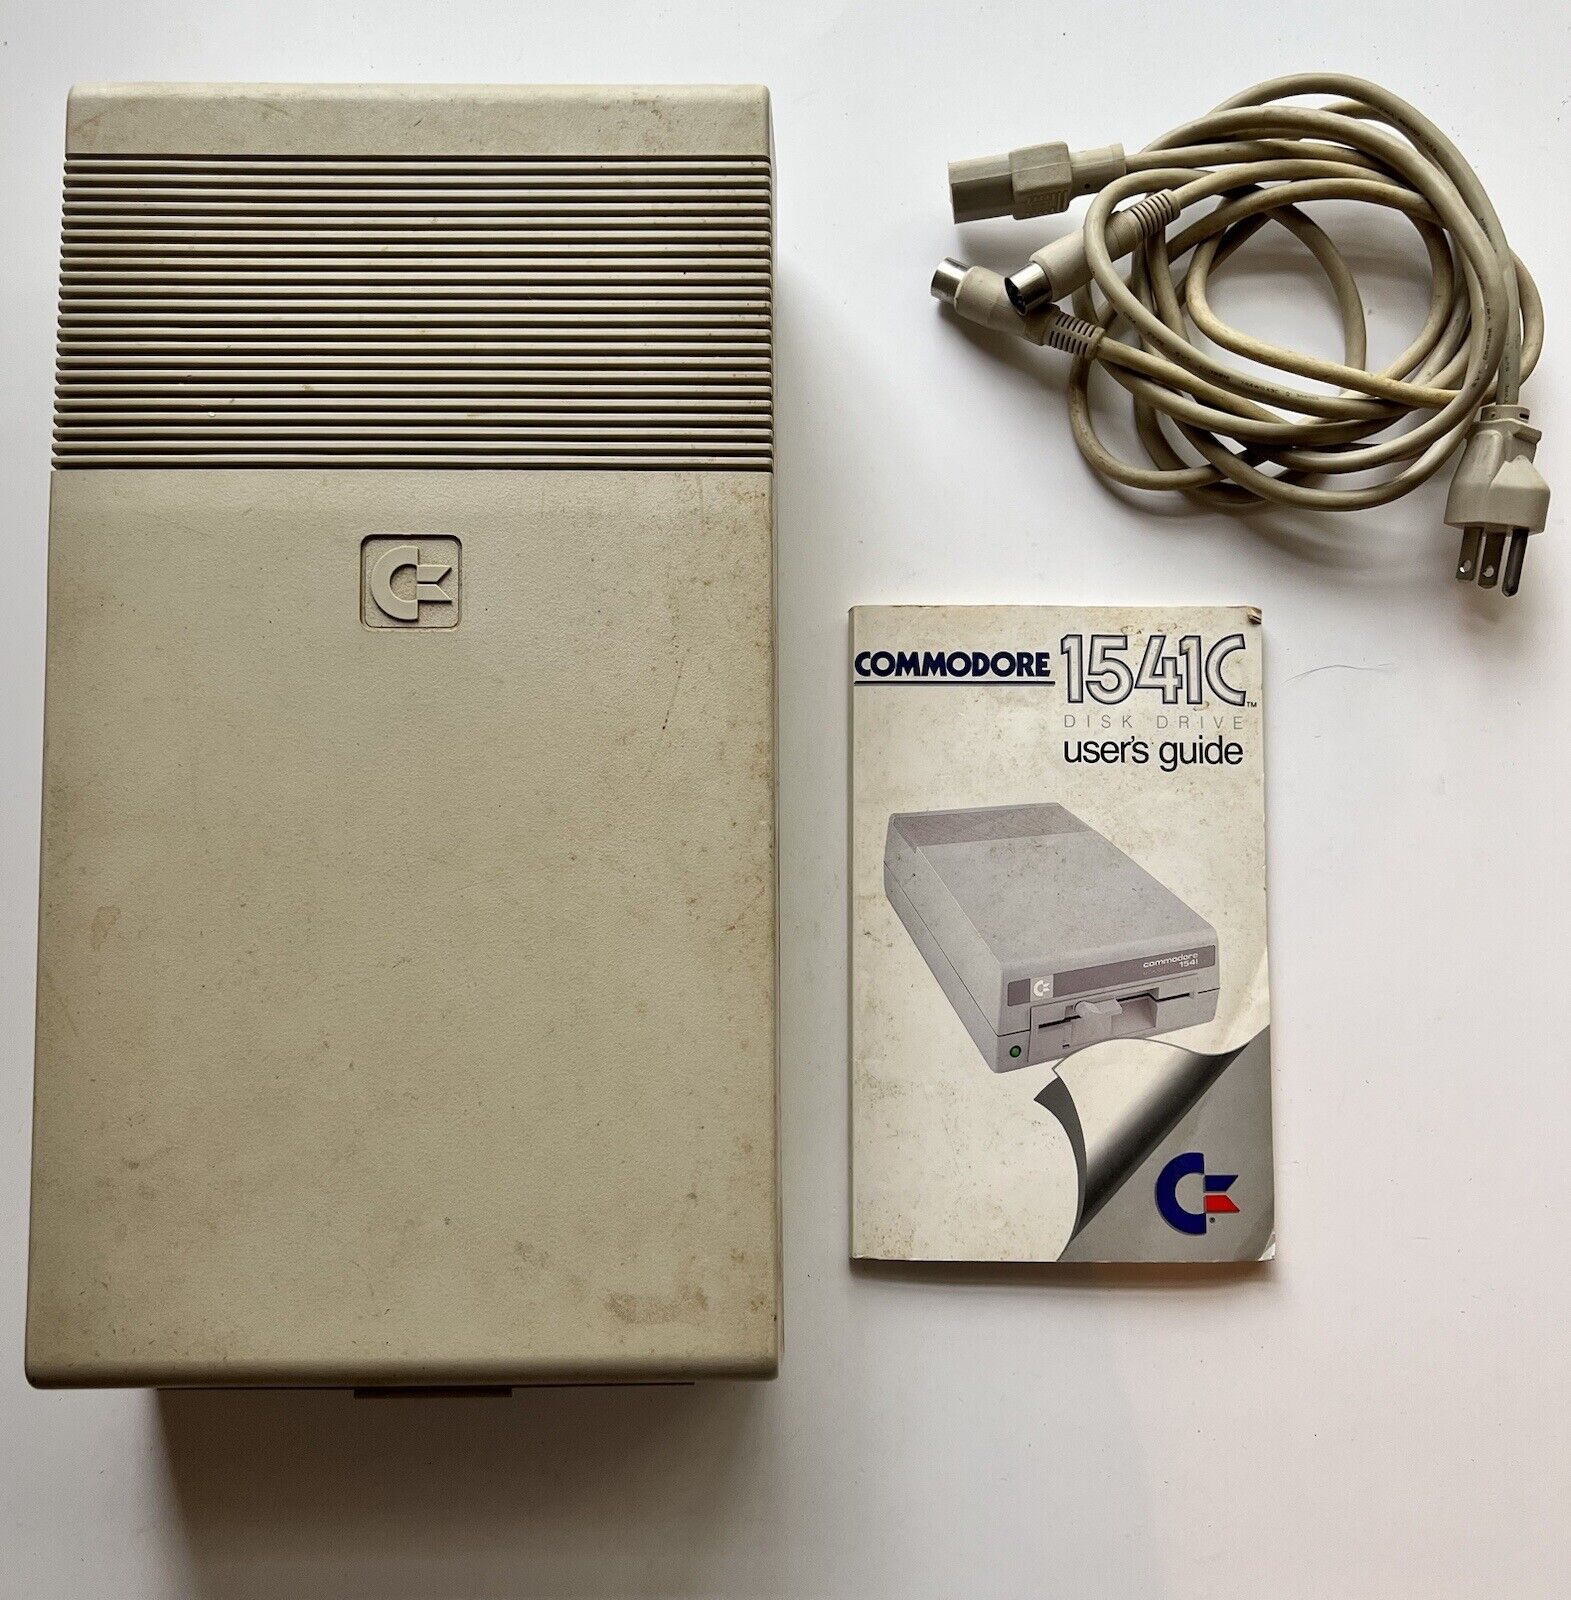 Commodore 64 Computer 1541C Floppy Disk Drive Vintage With Manual Untested